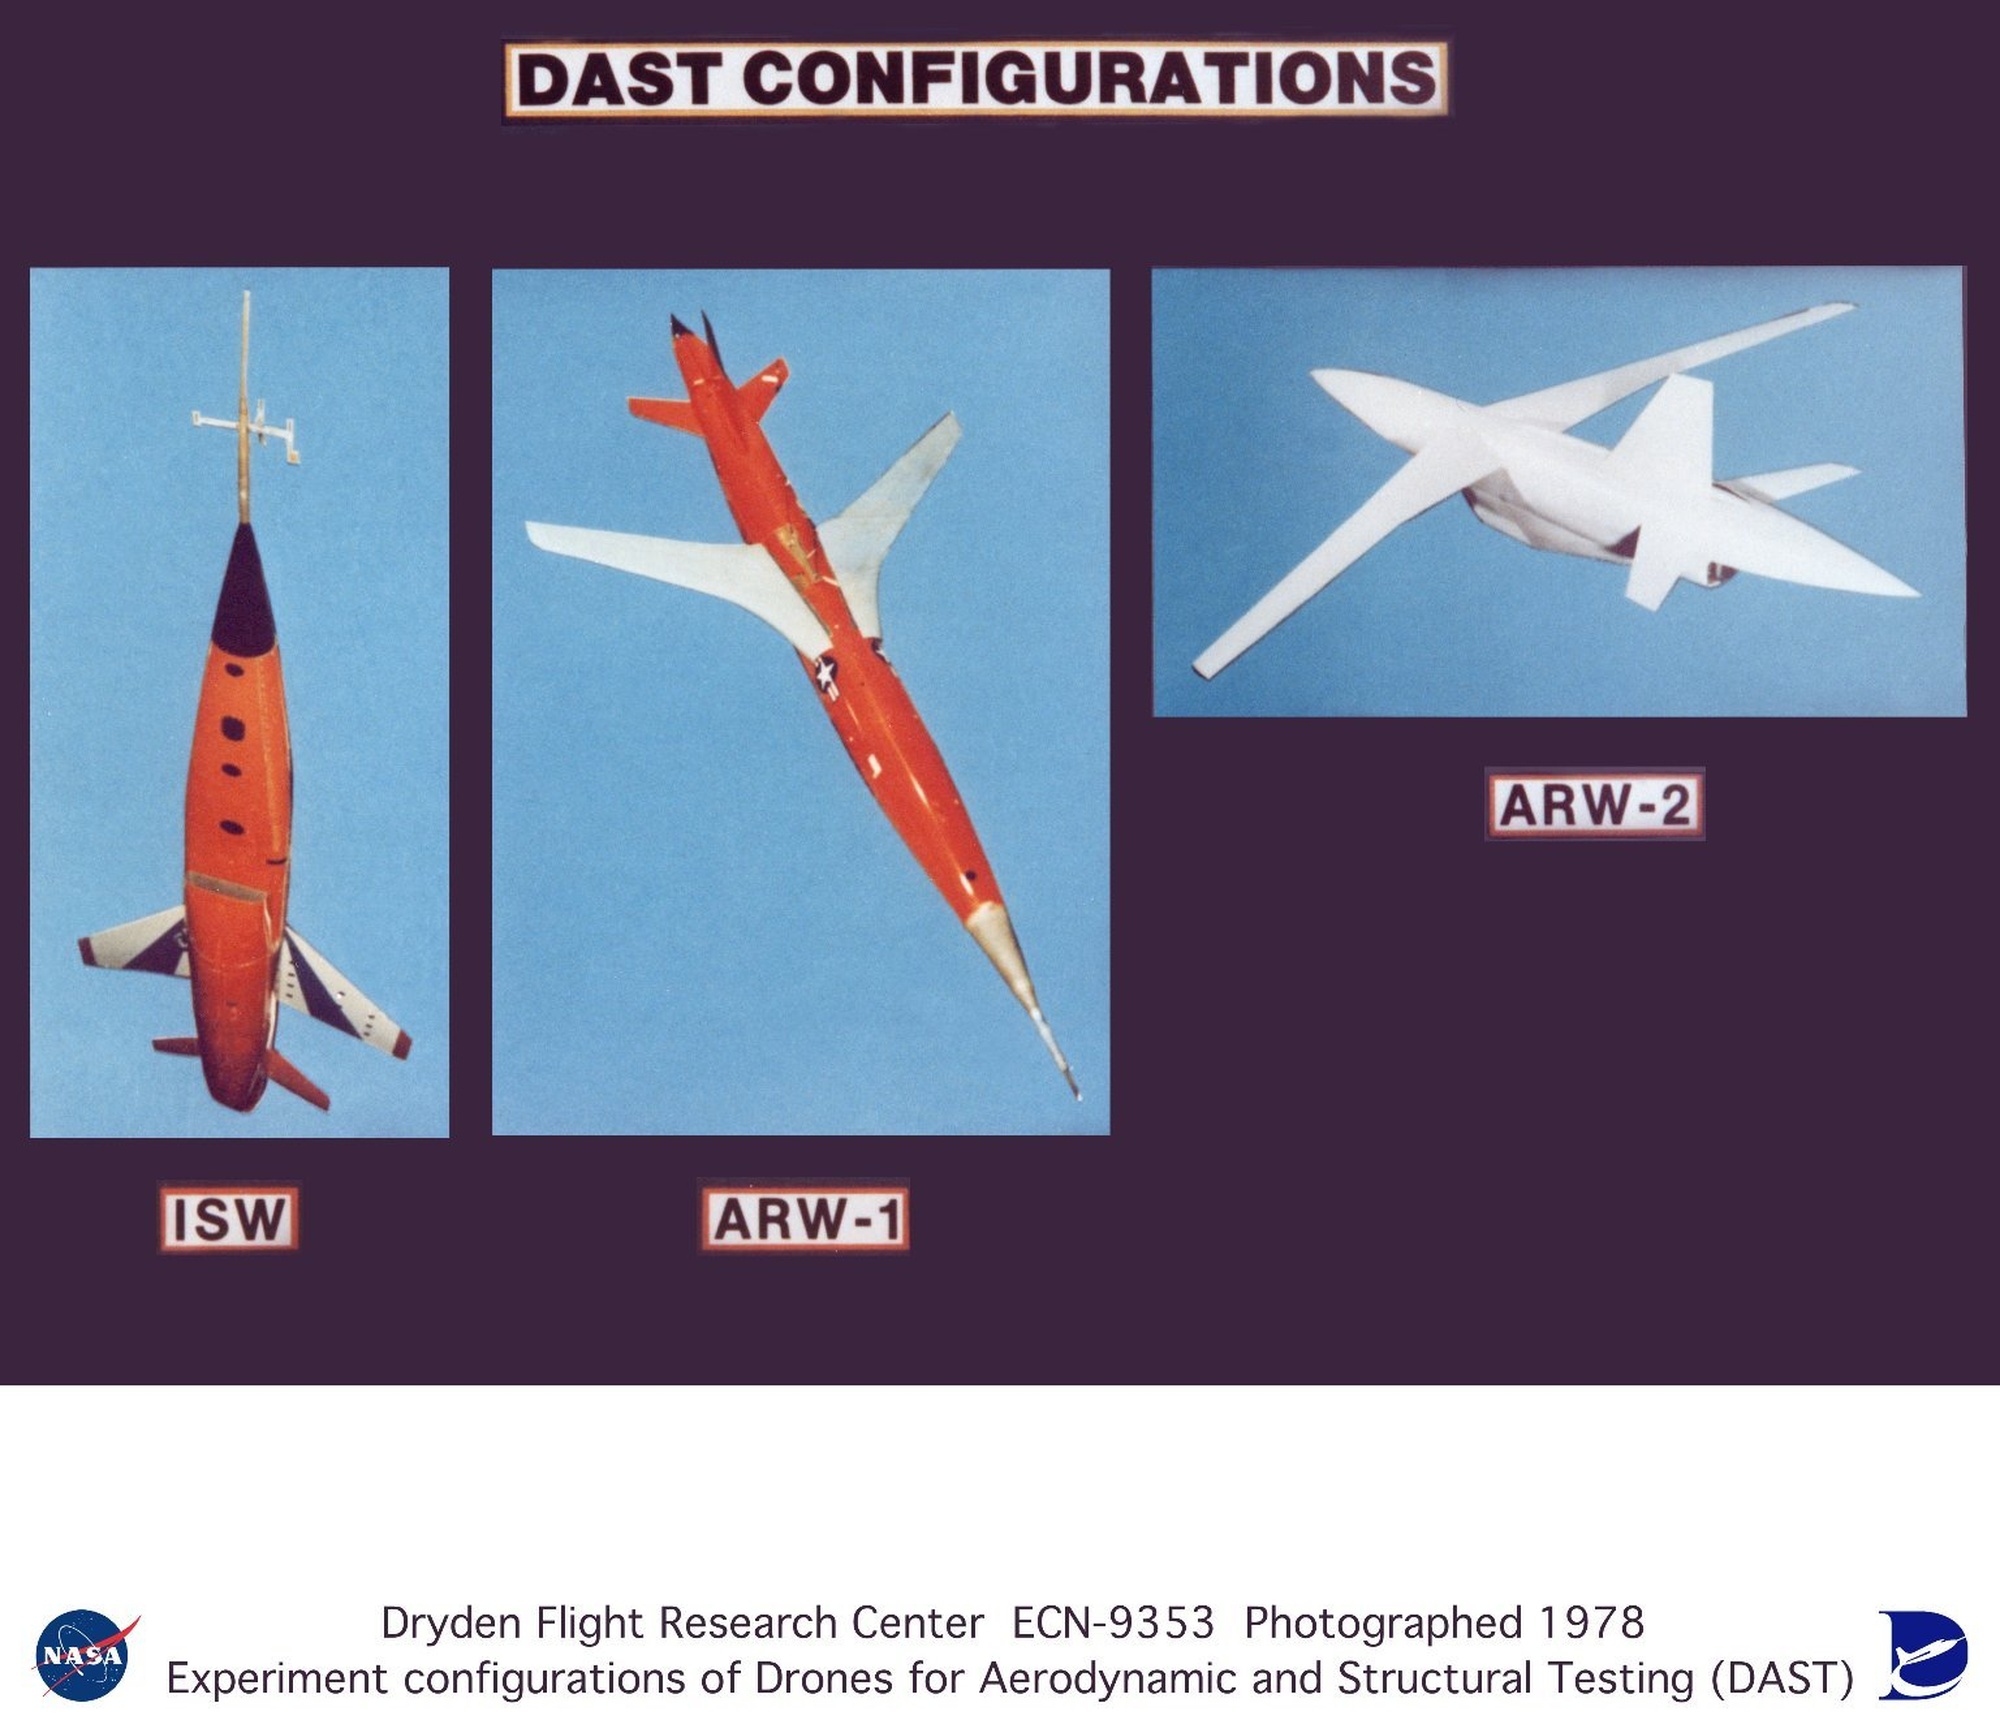 DVIDS - Images - Experiment Configurations for the DAST